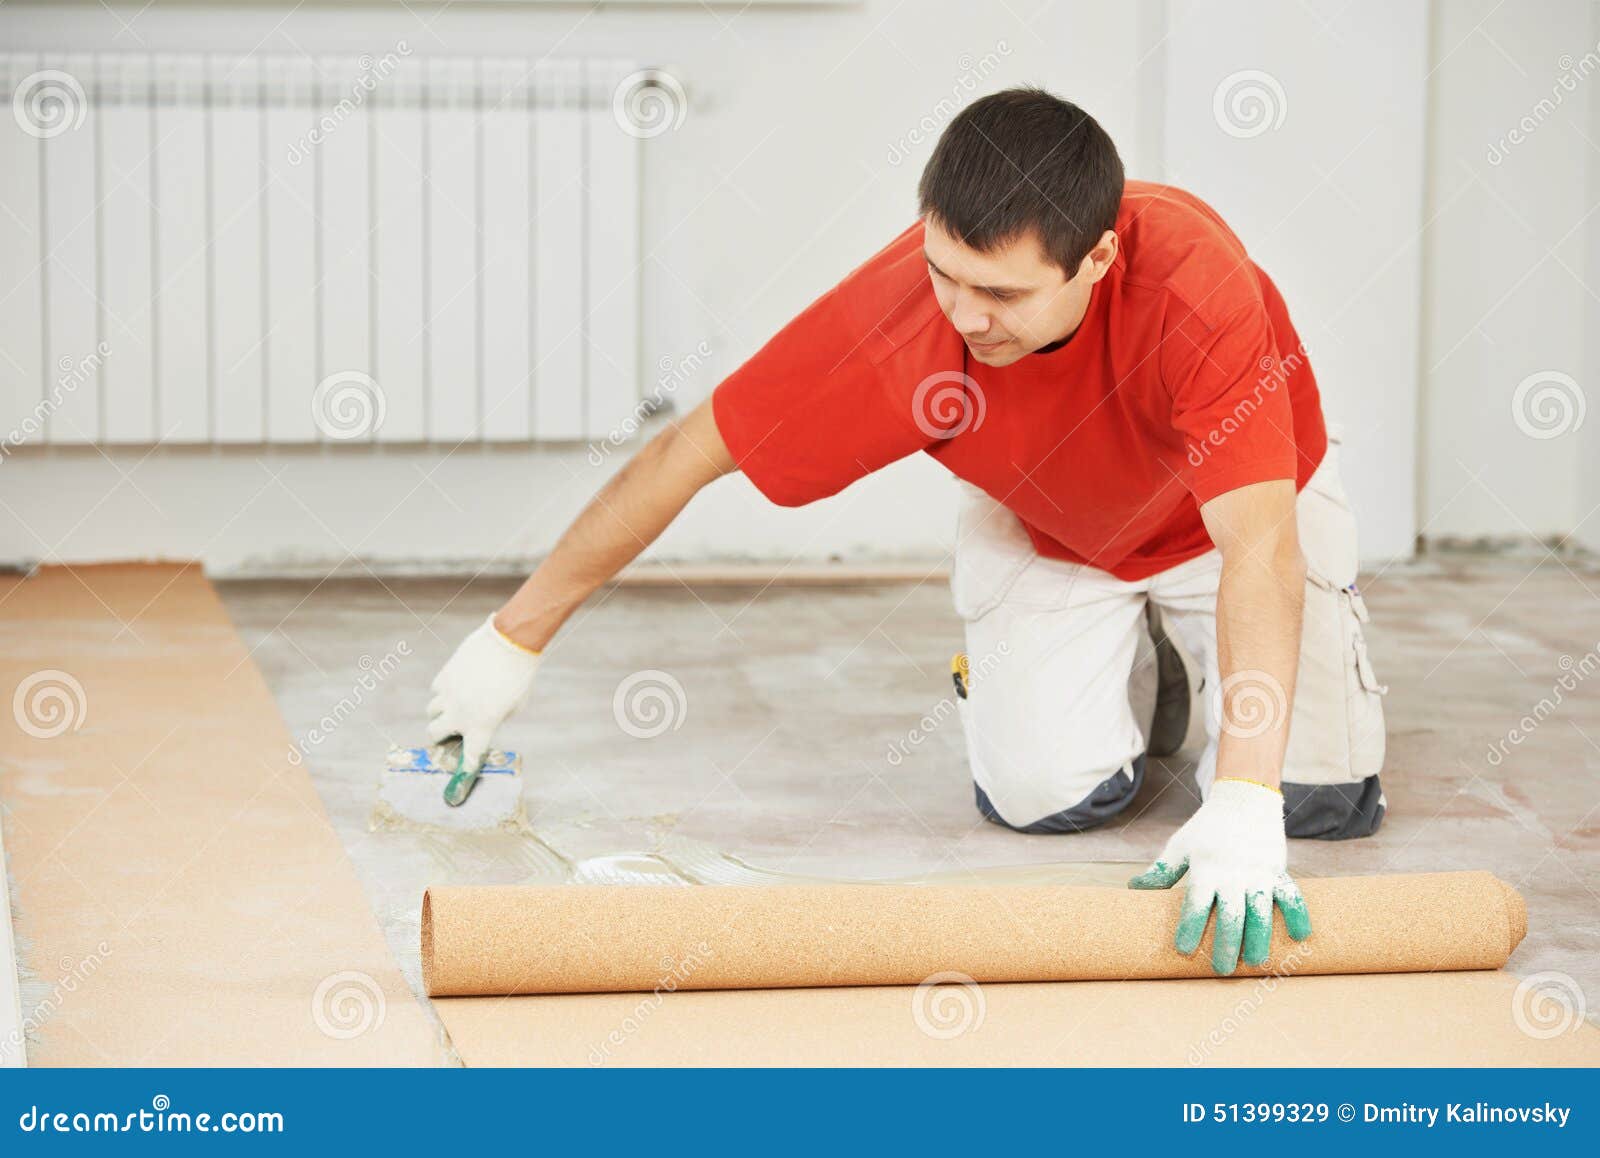 Parquet Floor Work With Stock Image Image Of Preparation 51399329